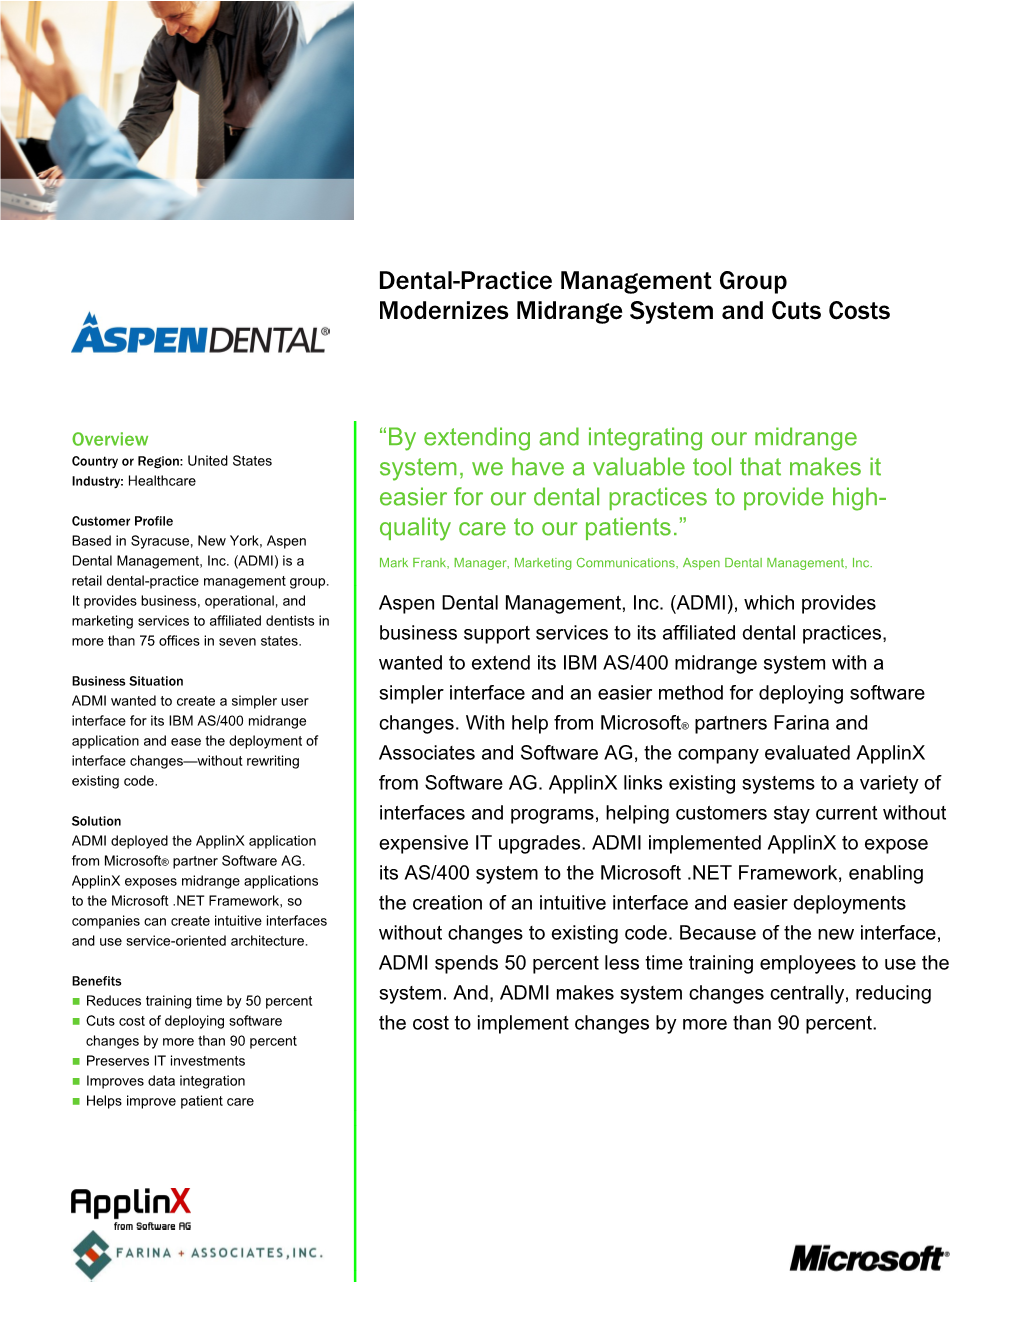 Dental-Practice Management Group Modernizes Midrange System and Cuts Costs